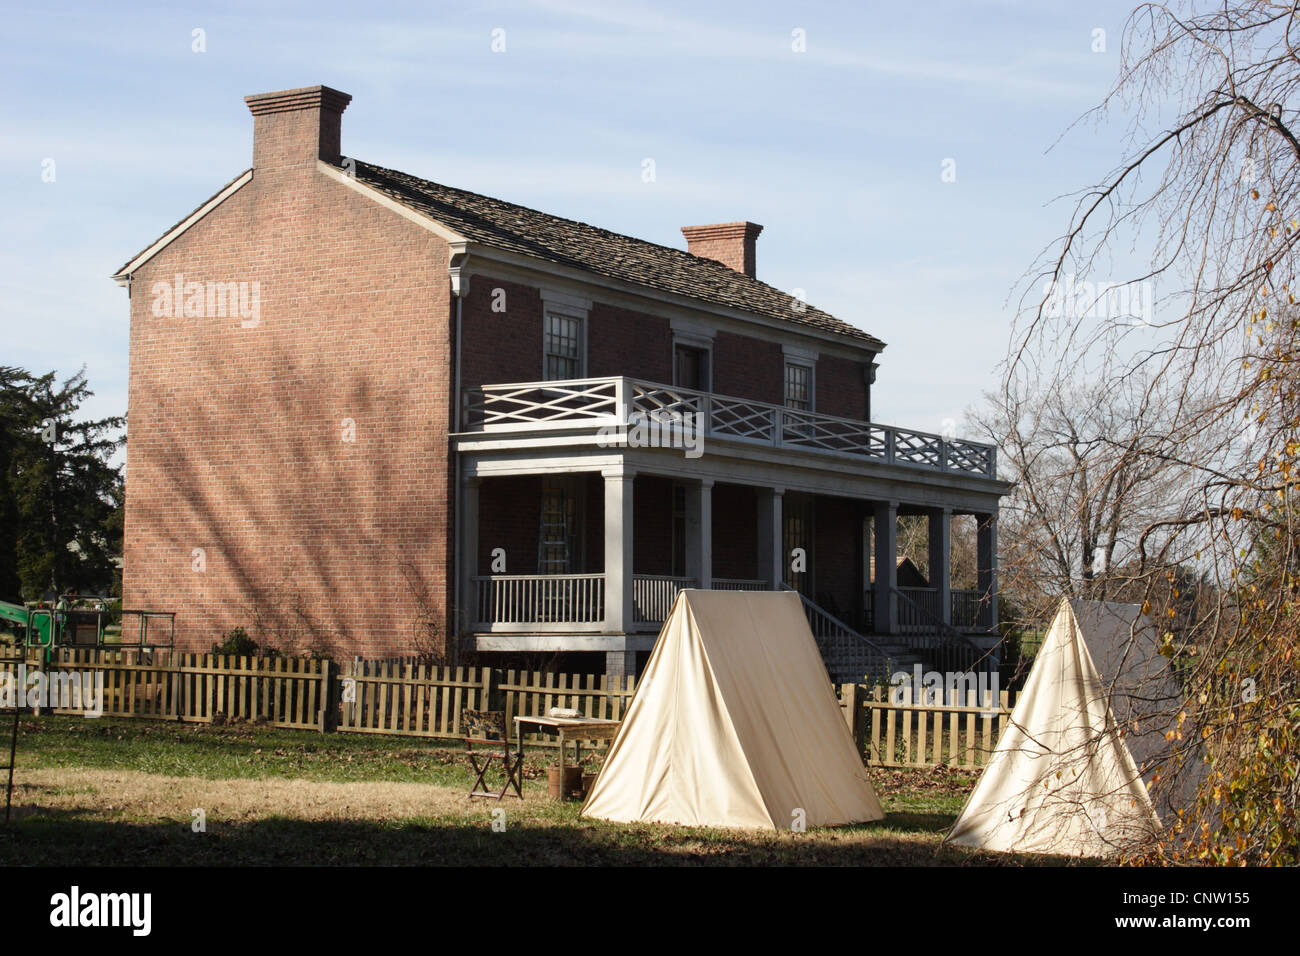 Spielberg reconstructs Appomattox Courthouse for his movie Lincoln. Maymont park, Richmond,VA 2011 Stock Photo